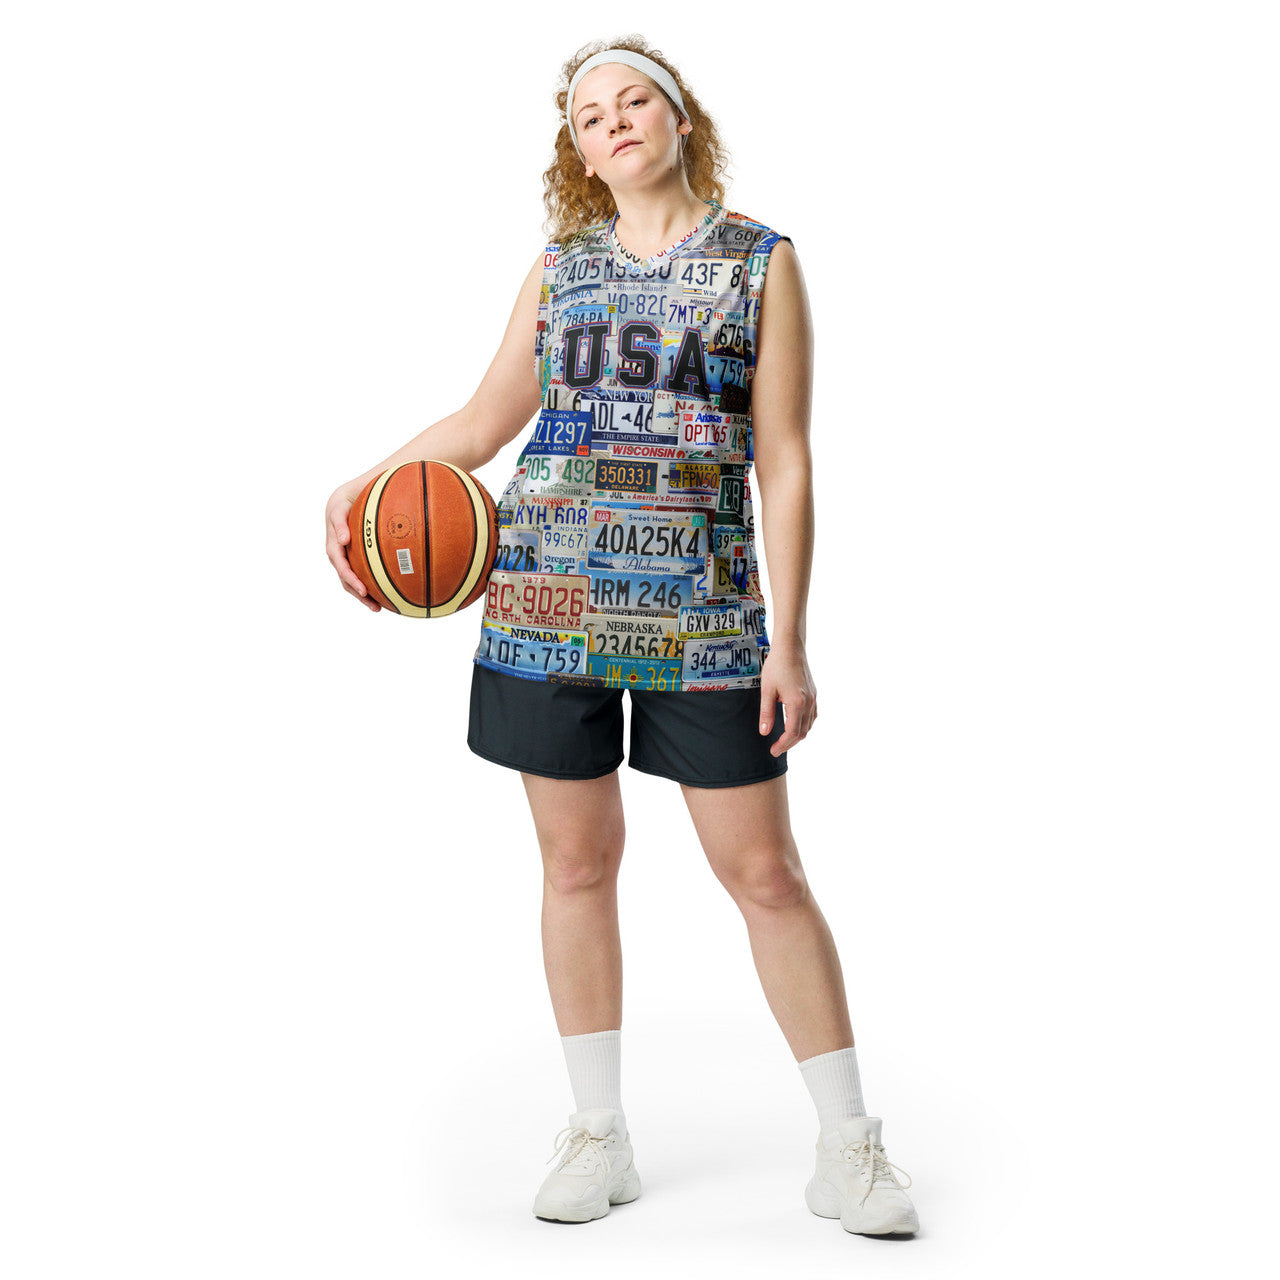 USA License Plates KiSS Recycled unisex basketball jersey - Travel NYC LA Texas Chicago